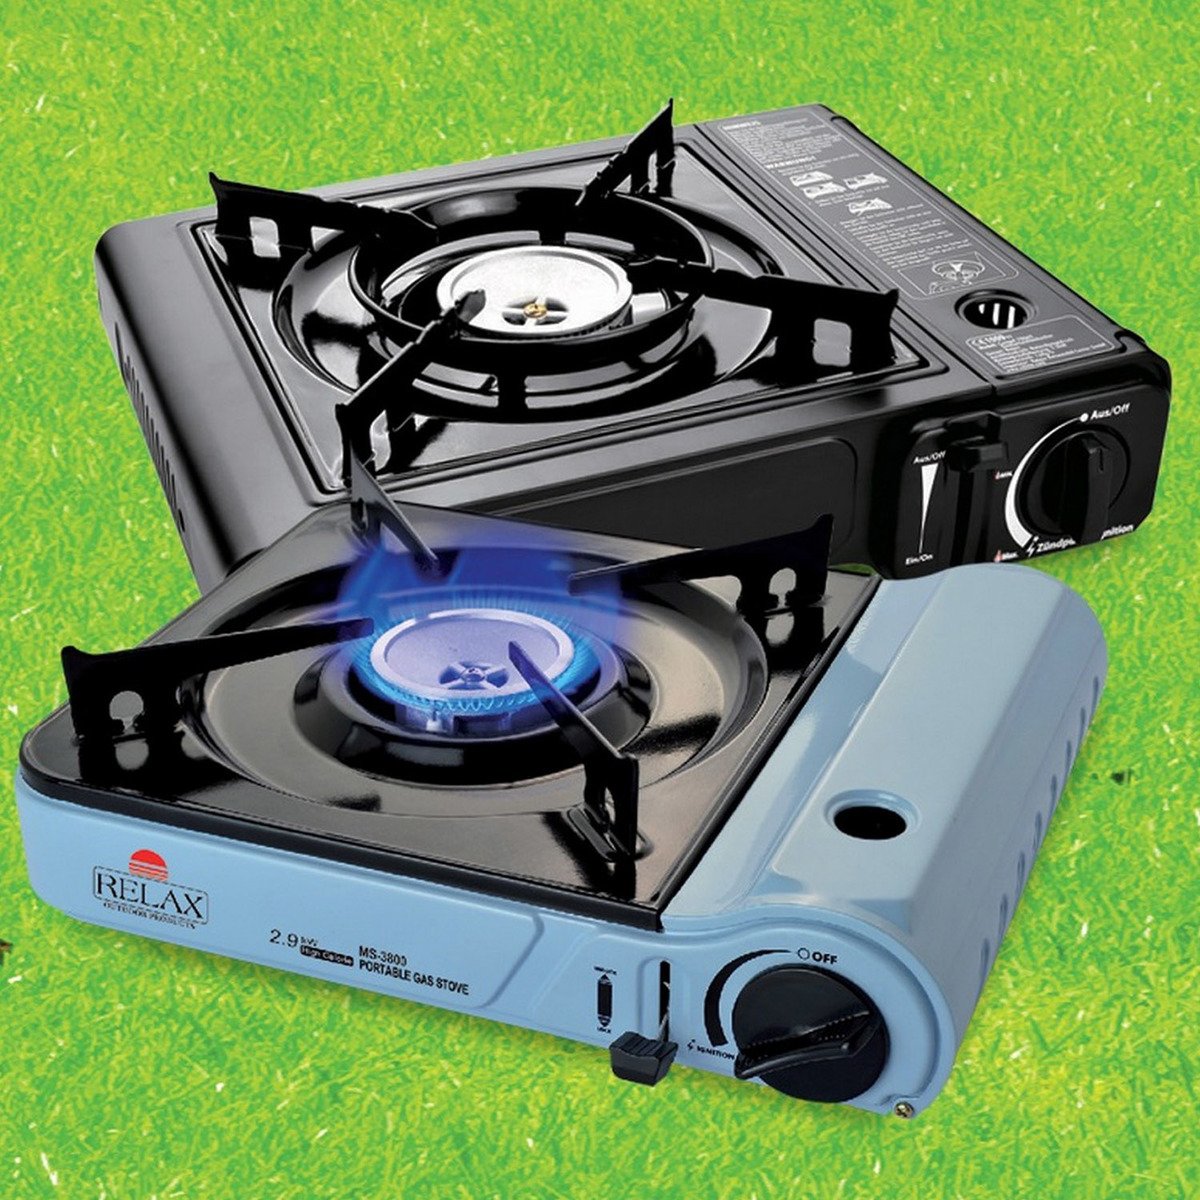 Relax Portable Gas Stove MS-2500 Assorted 1Piece Online at Best Price, BBQ  Gas, Lulu Kuwait price in UAE, LuLu UAE